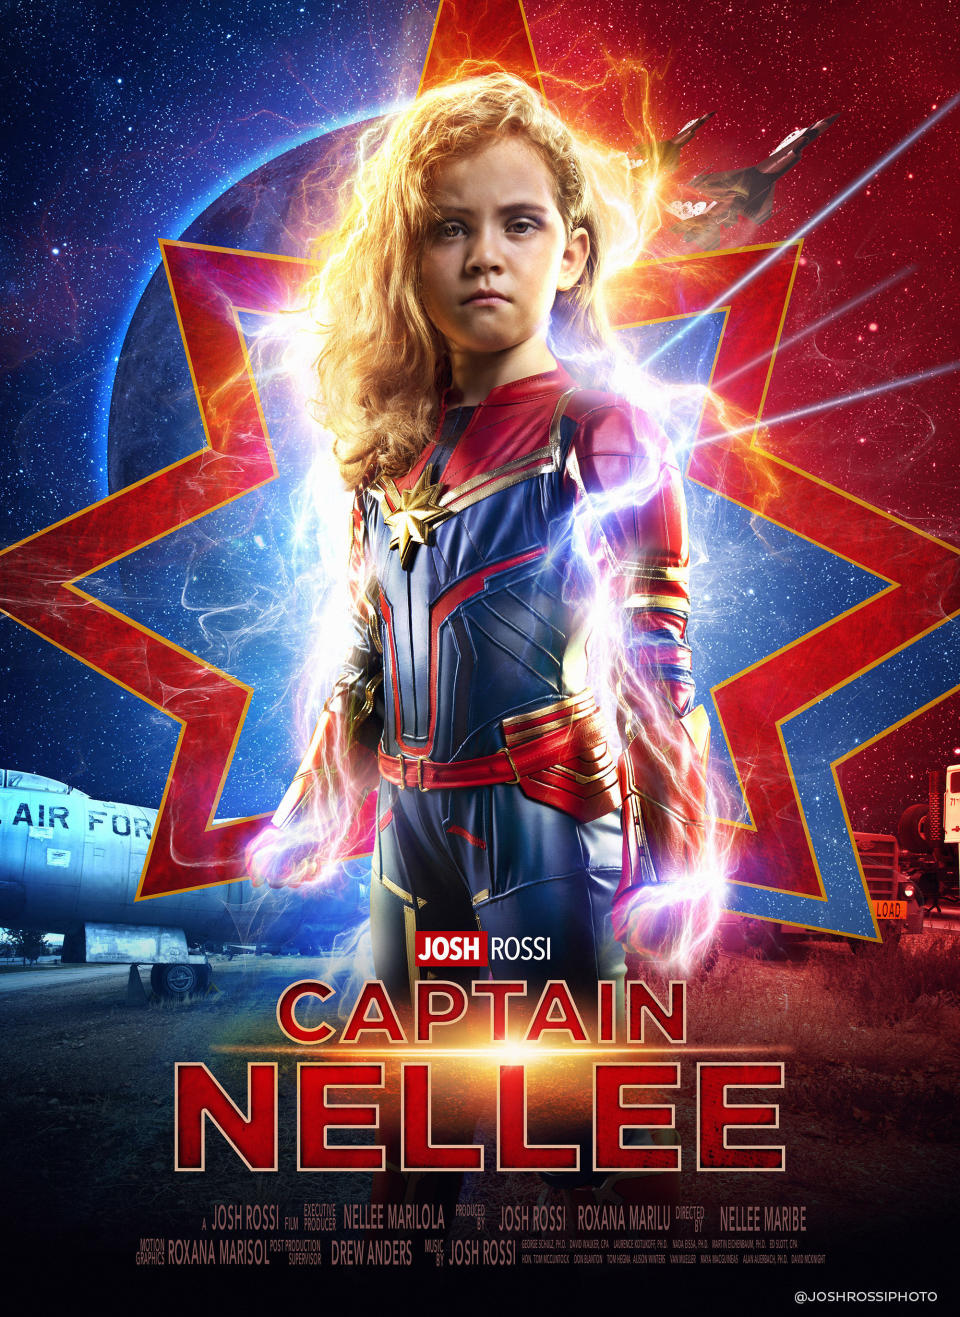 Rossi organized a "Captain Marvel"-themed photo shoot for Nellee. (Photo: Josh Rossi Photography)